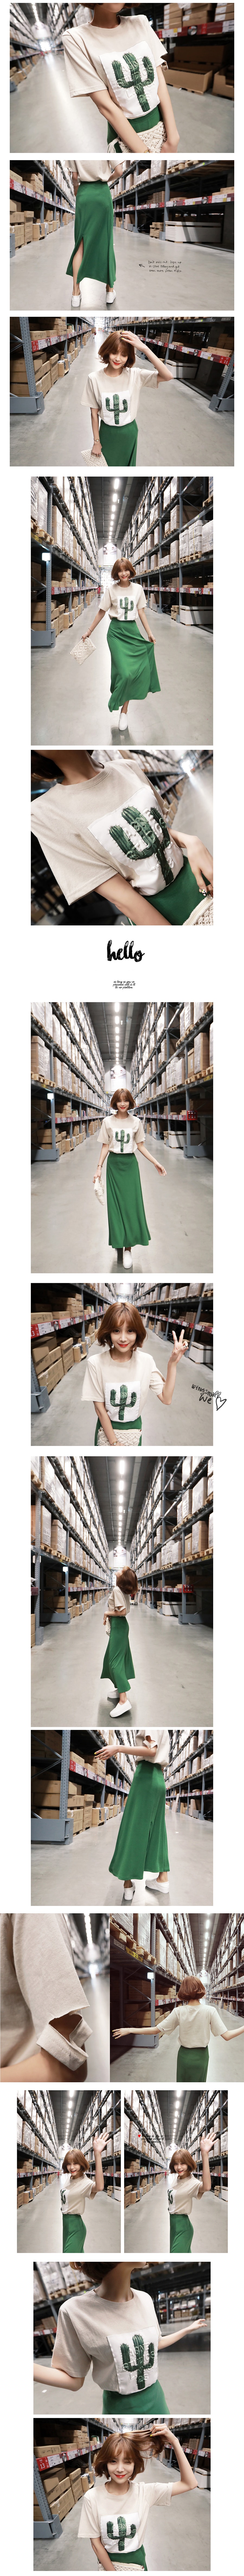 KOREA Natural Soft Long Skirt Green One Size(S-M) [Free Shipping]